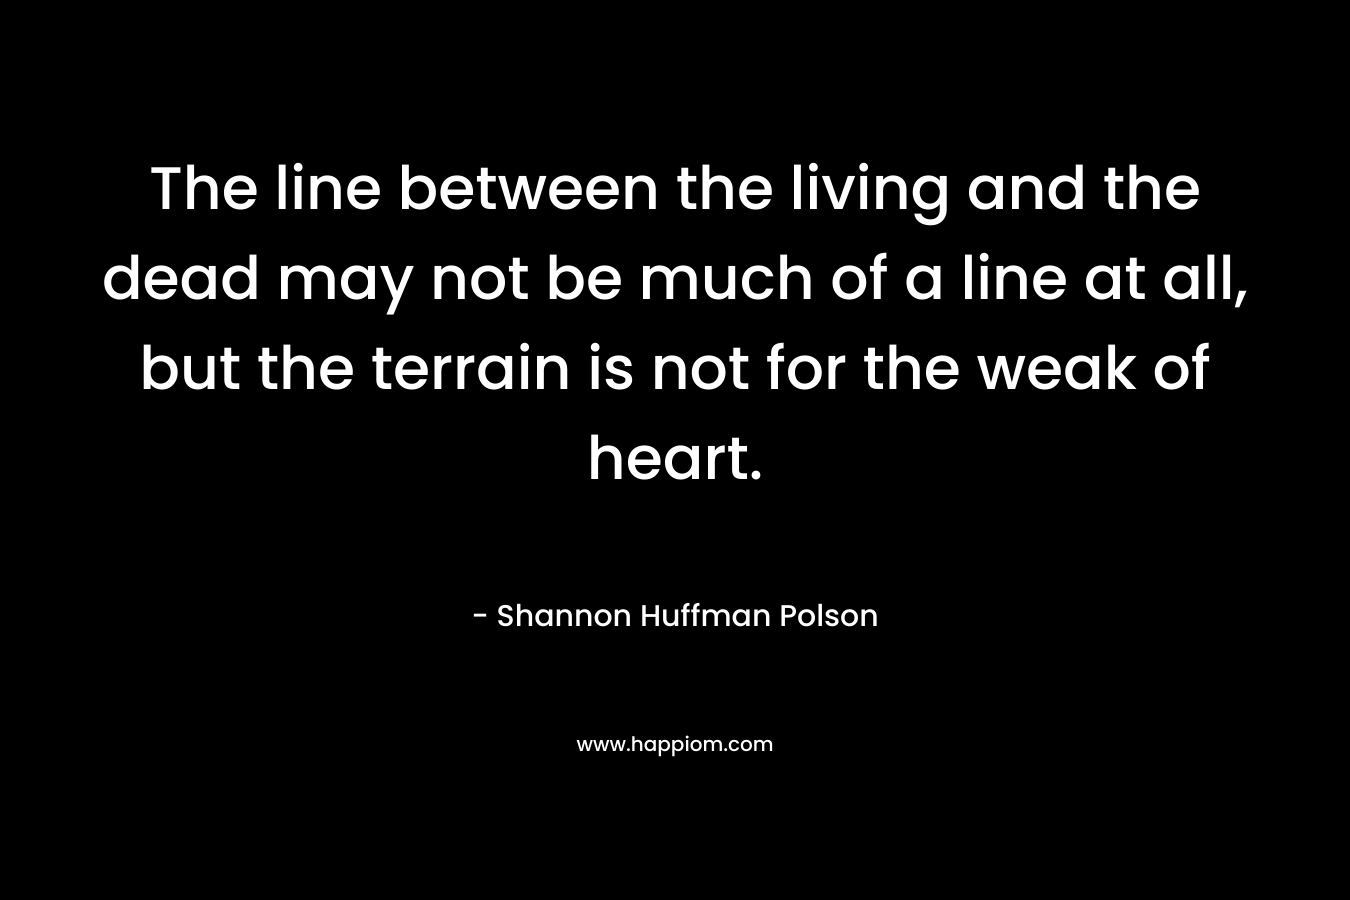 The line between the living and the dead may not be much of a line at all, but the terrain is not for the weak of heart.